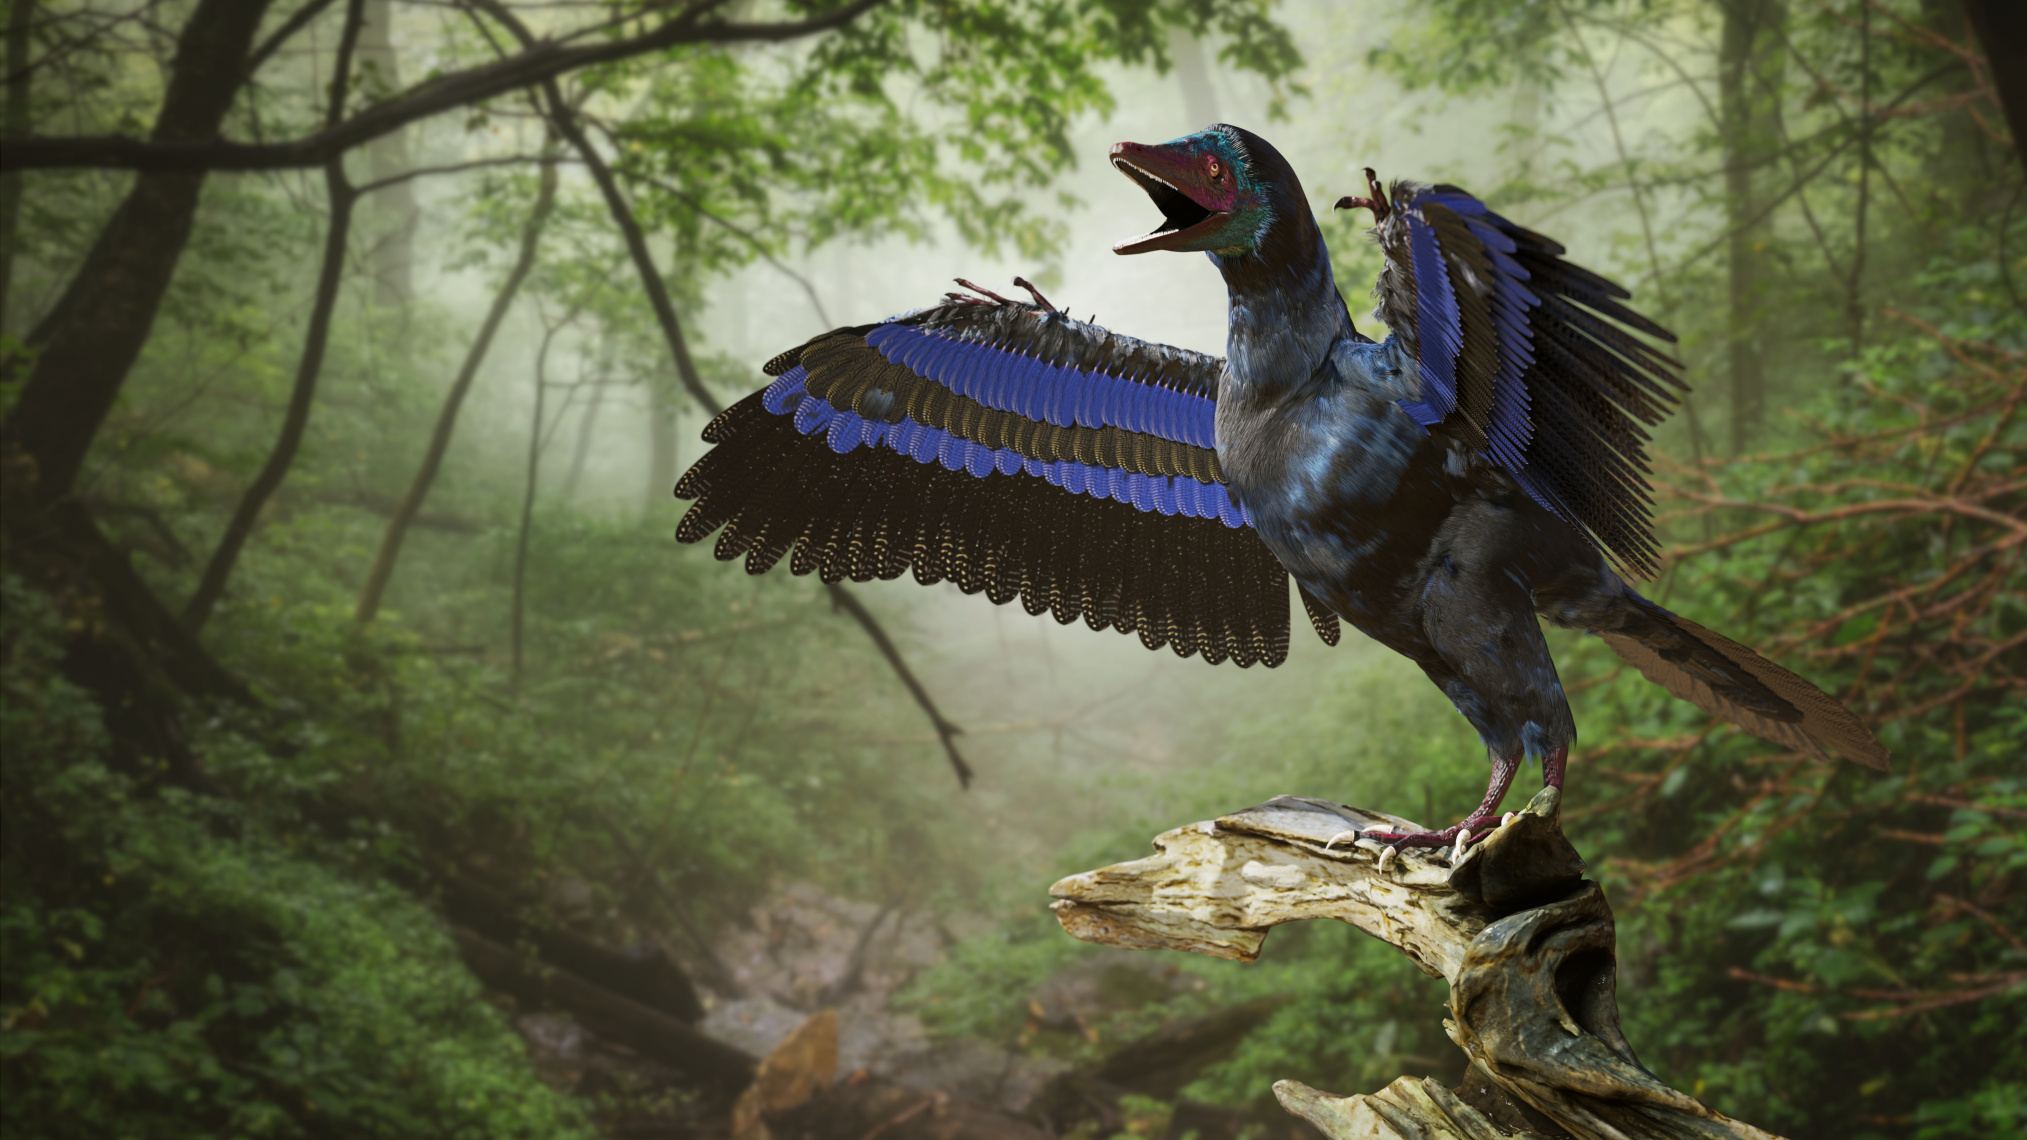 Archaeopteryx, bird-like dinosaur from the Late Jurassic period around 150 million years ago (3d rendering)